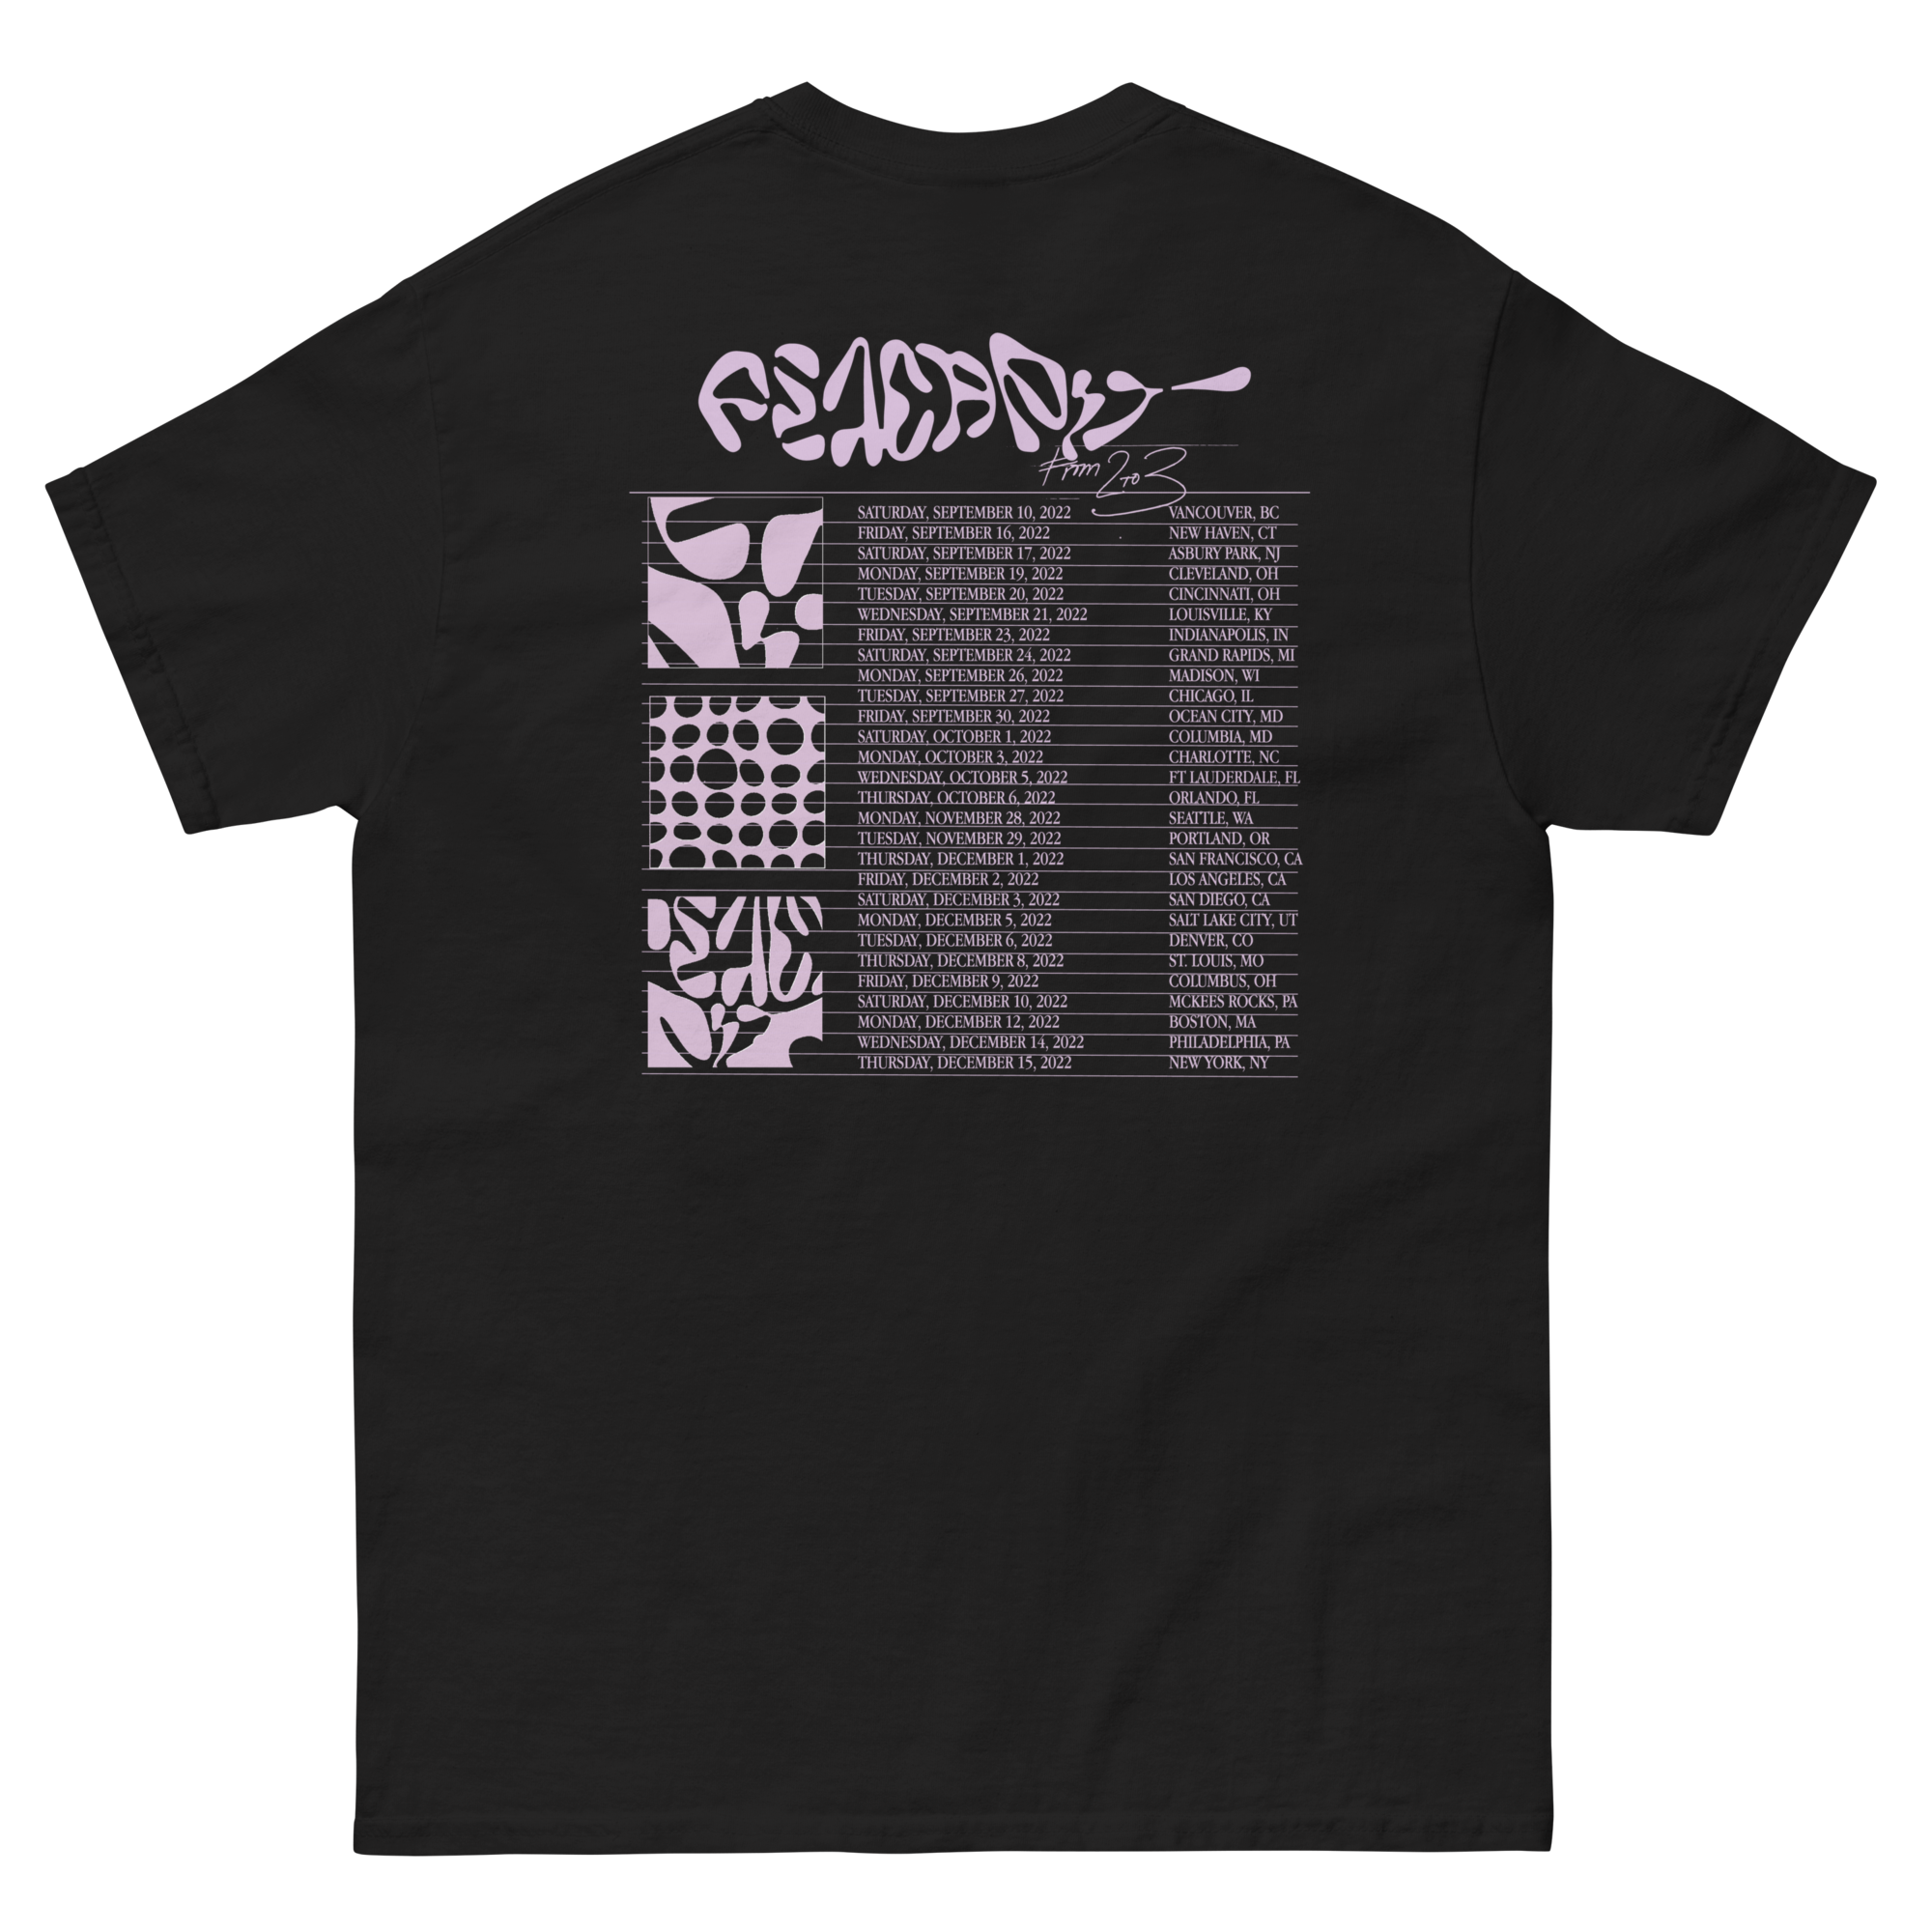 Right Down The Street Tour Tee